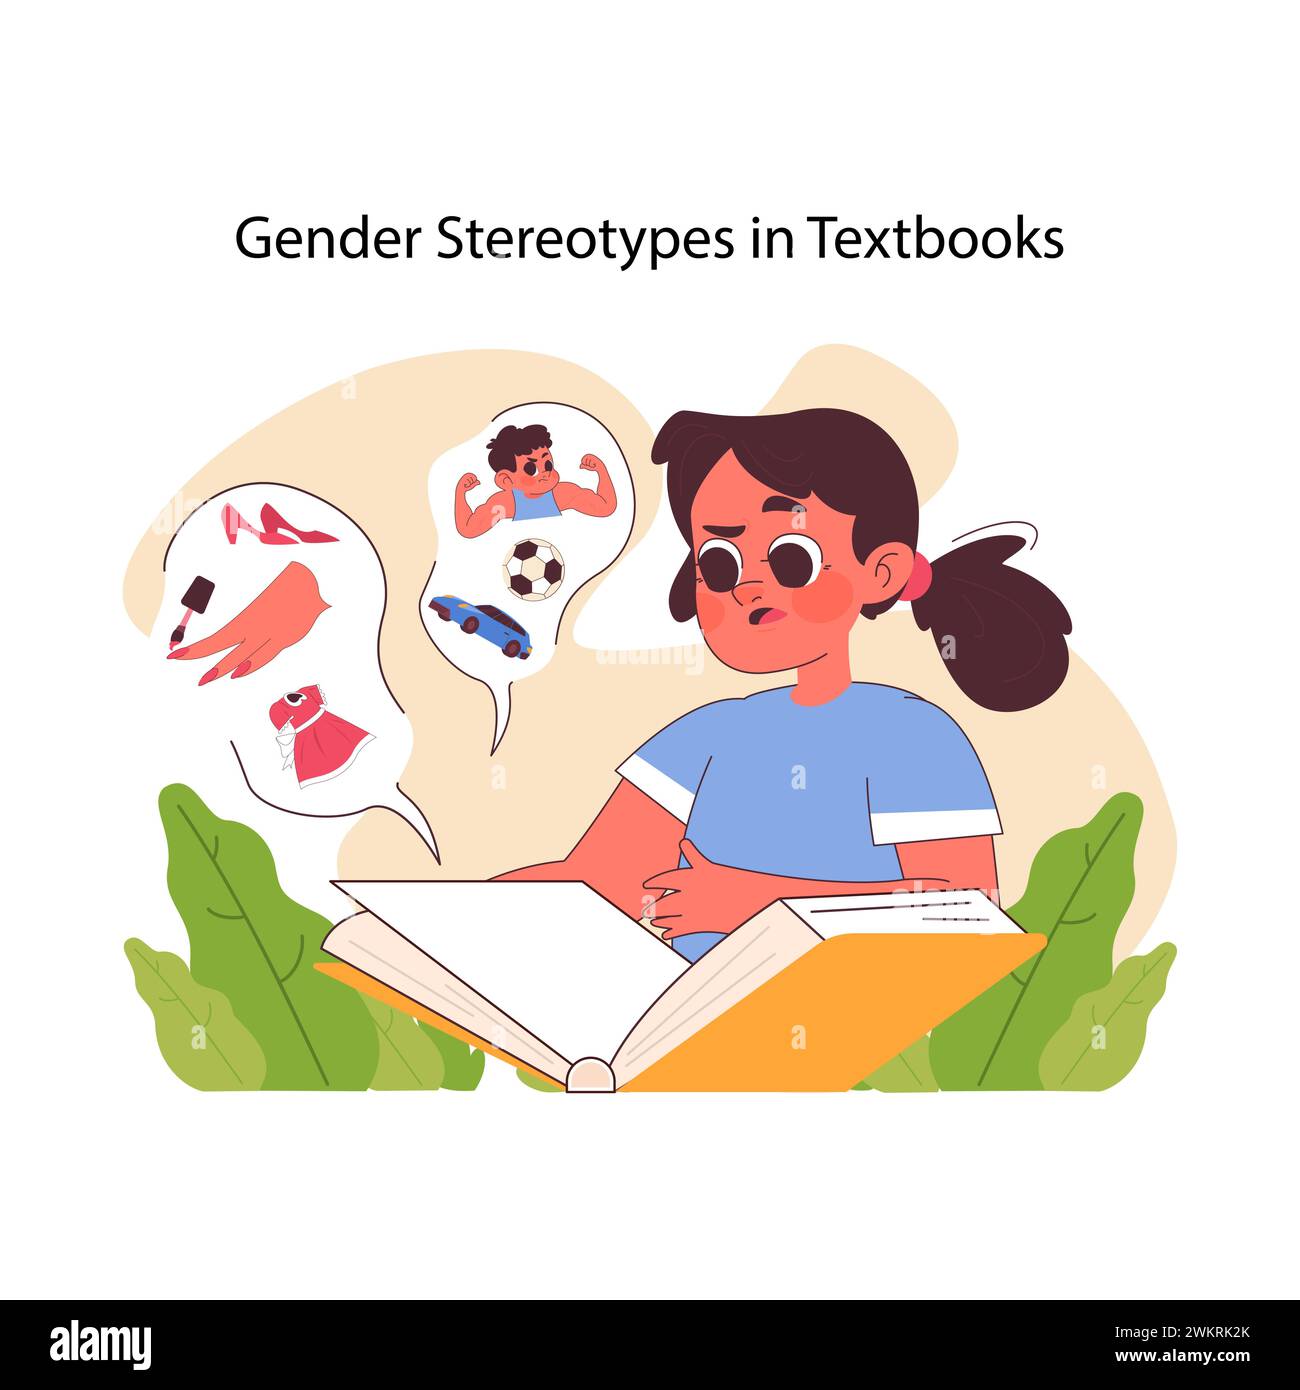 Gender stereotypes in textbooks concept. A thoughtful girl reading a book confronts ingrained notions of gender roles, reflecting societal norms and biases. Flat vector illustration Stock Vector